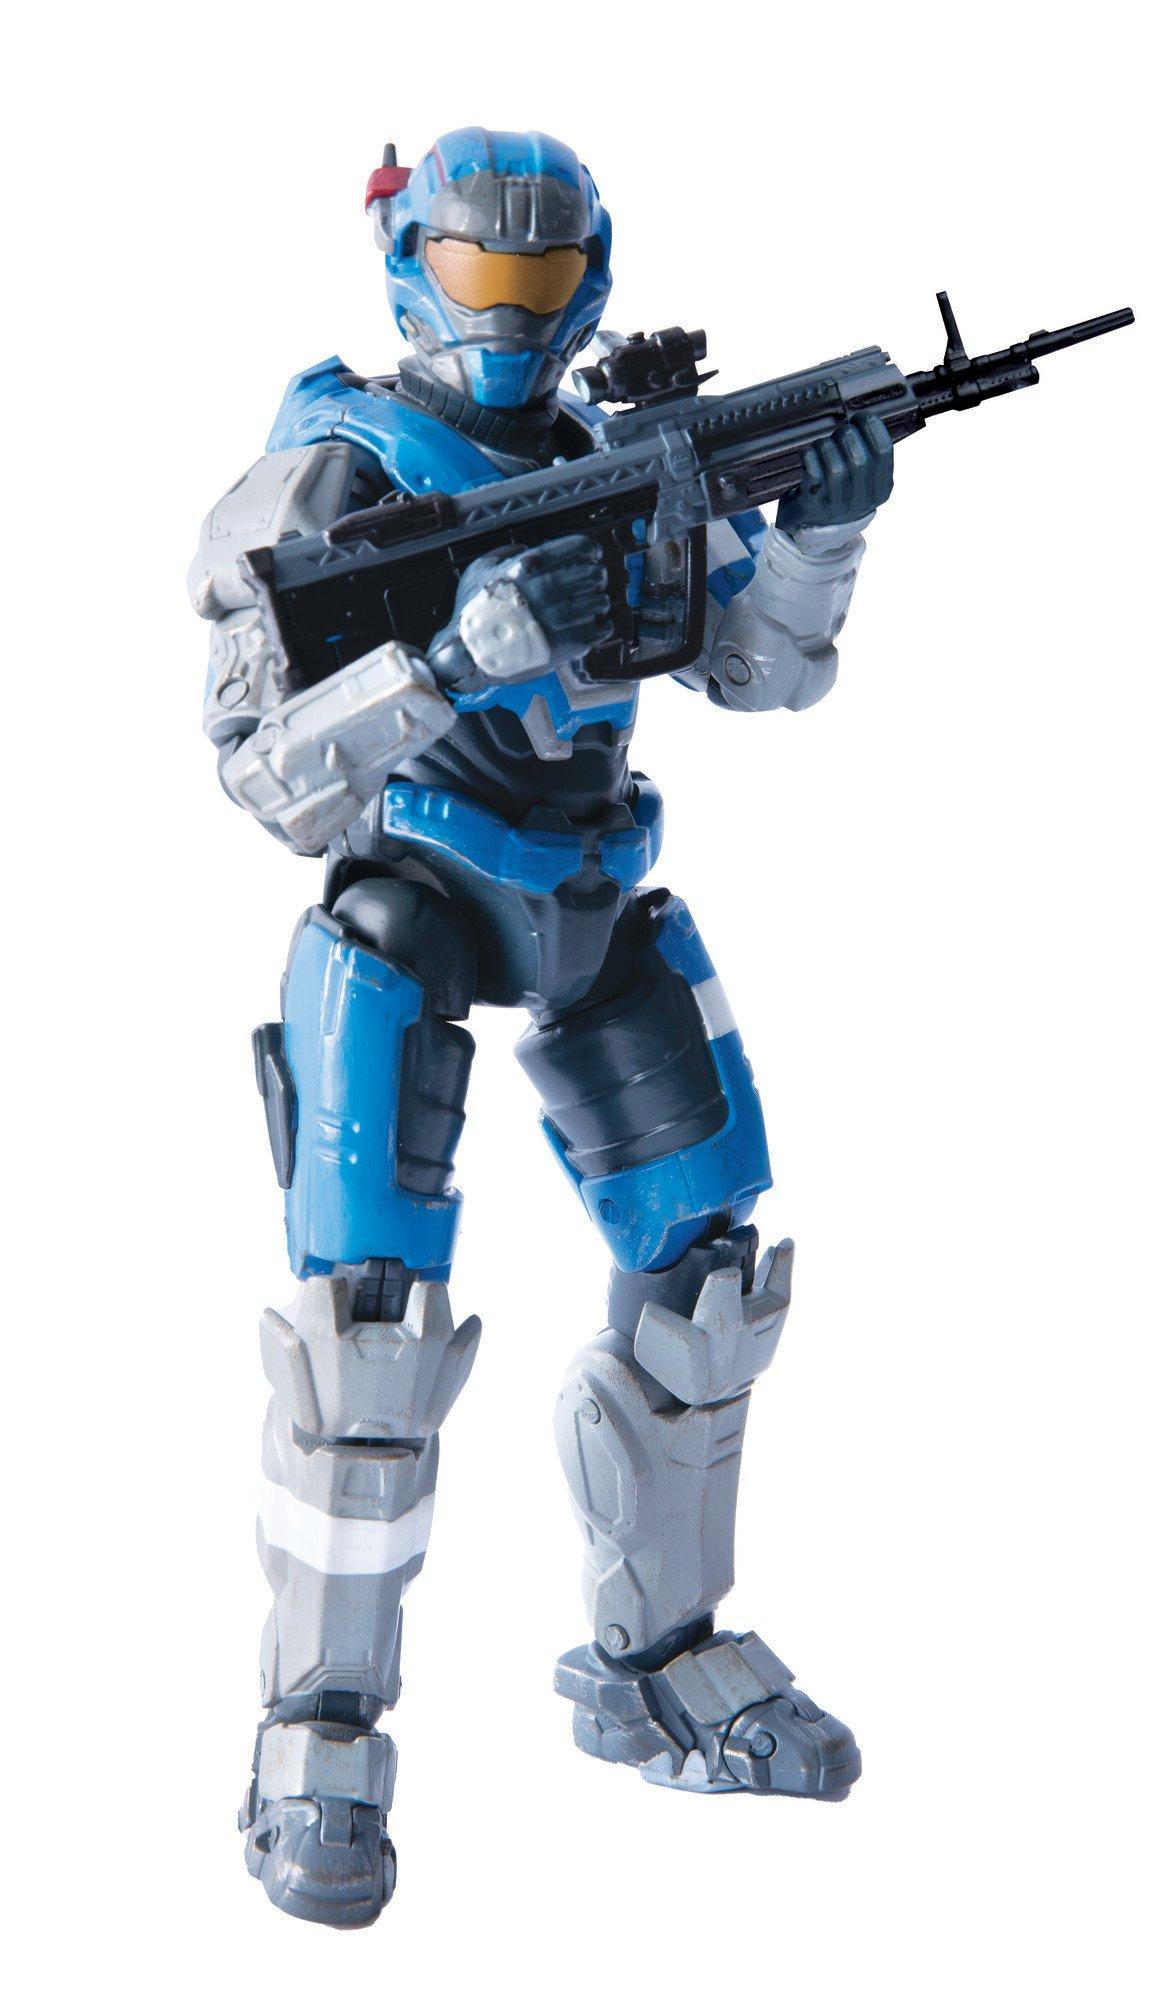 carter from halo reach